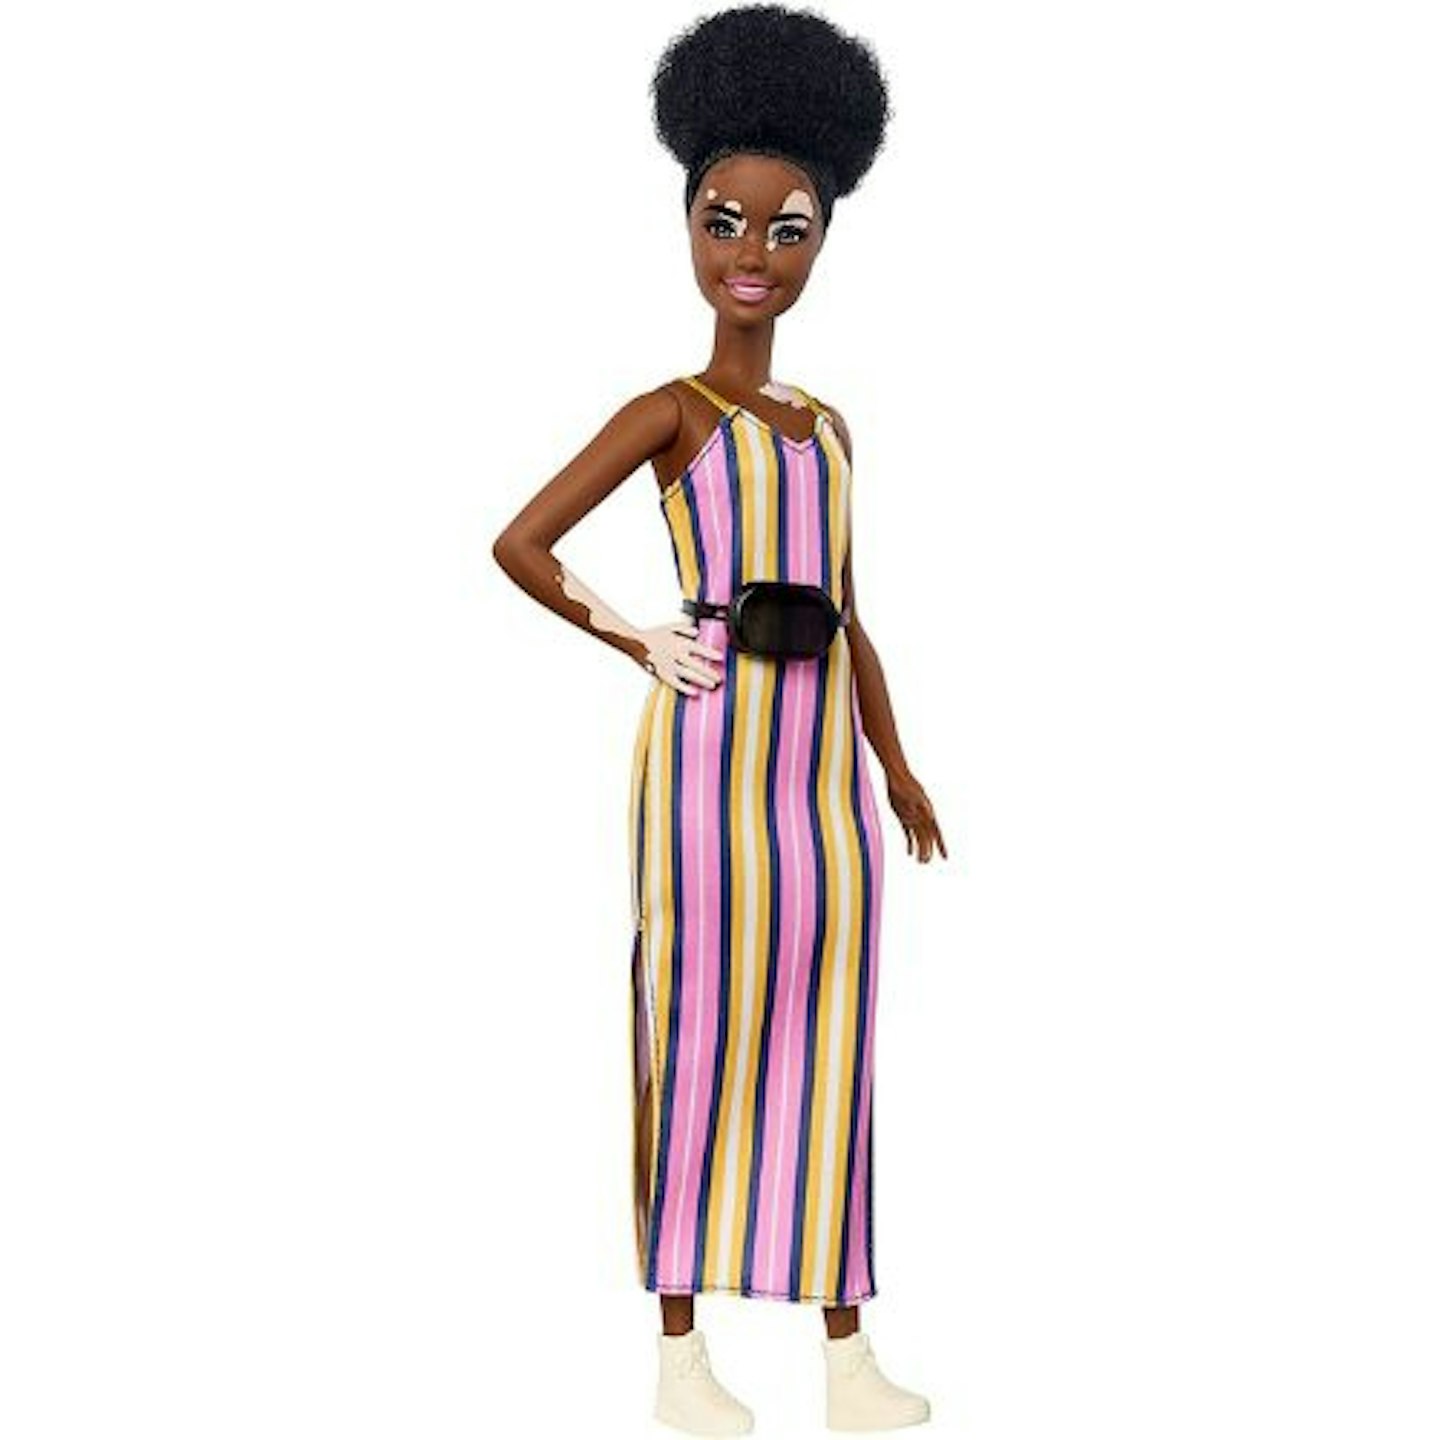 Best Barbie Toy : Barbie GHW51 Fashionistas Doll with Vitiligo and Curly Brunette Hair Wearing Striped Dress and Accessories